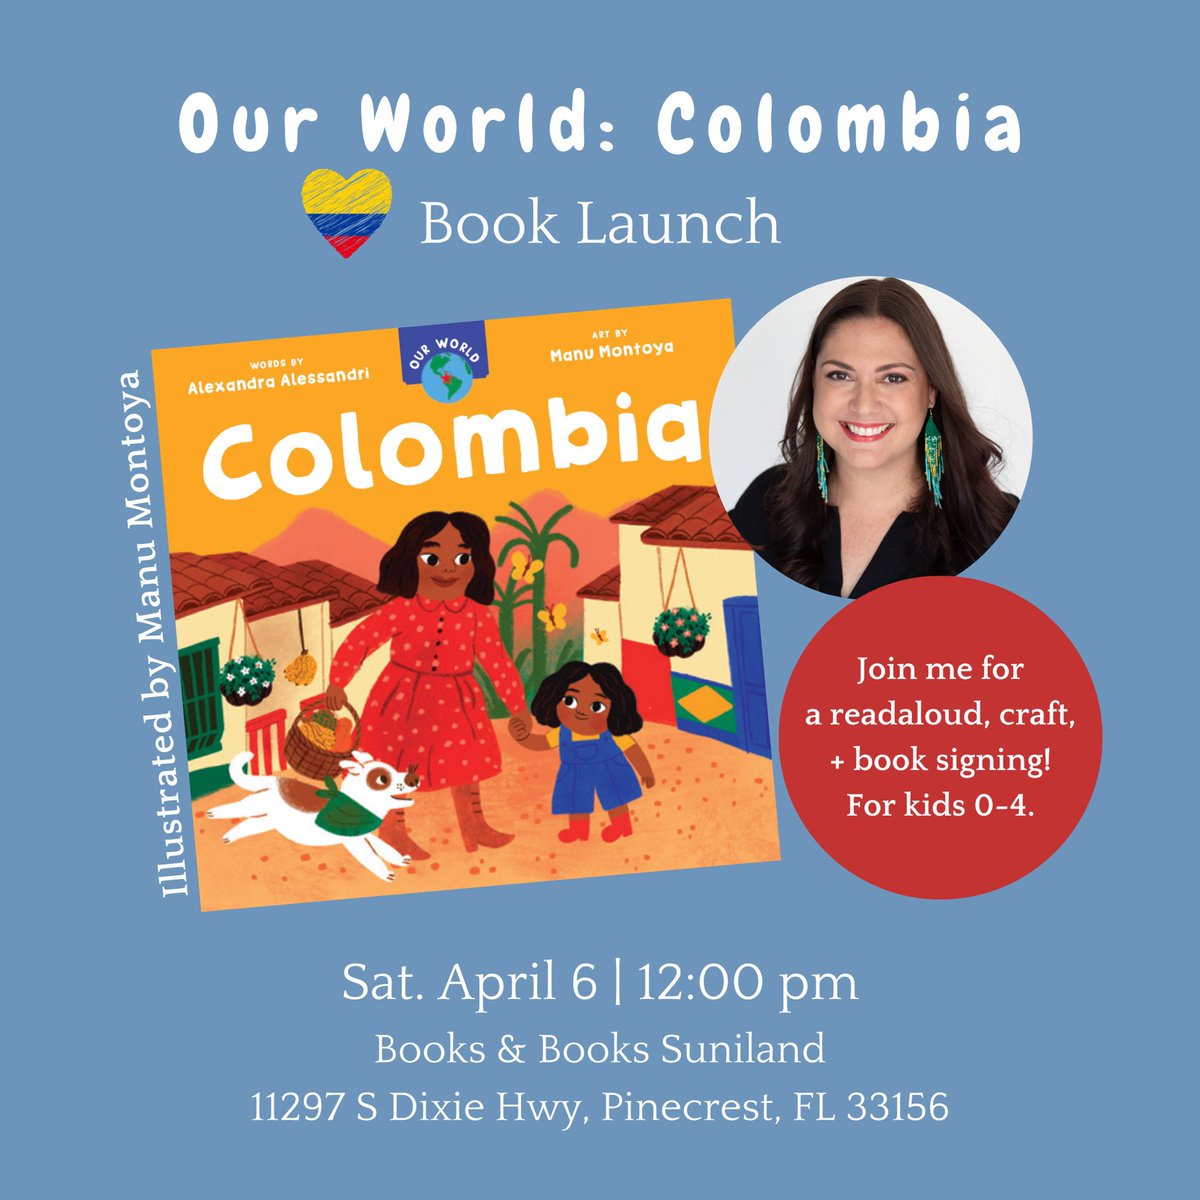 #miami friends: Join me for a storytime, craft, & book signing to celebrate the launch of OUR WORLD COLOMBIA! When: Sat April 6 @ 12 pm Where: @BooksandBooks Suniland 11297 S Dixie Hwy, Pinecrest, FL 33156 Register for this free event here: bit.ly/4bWqGLk